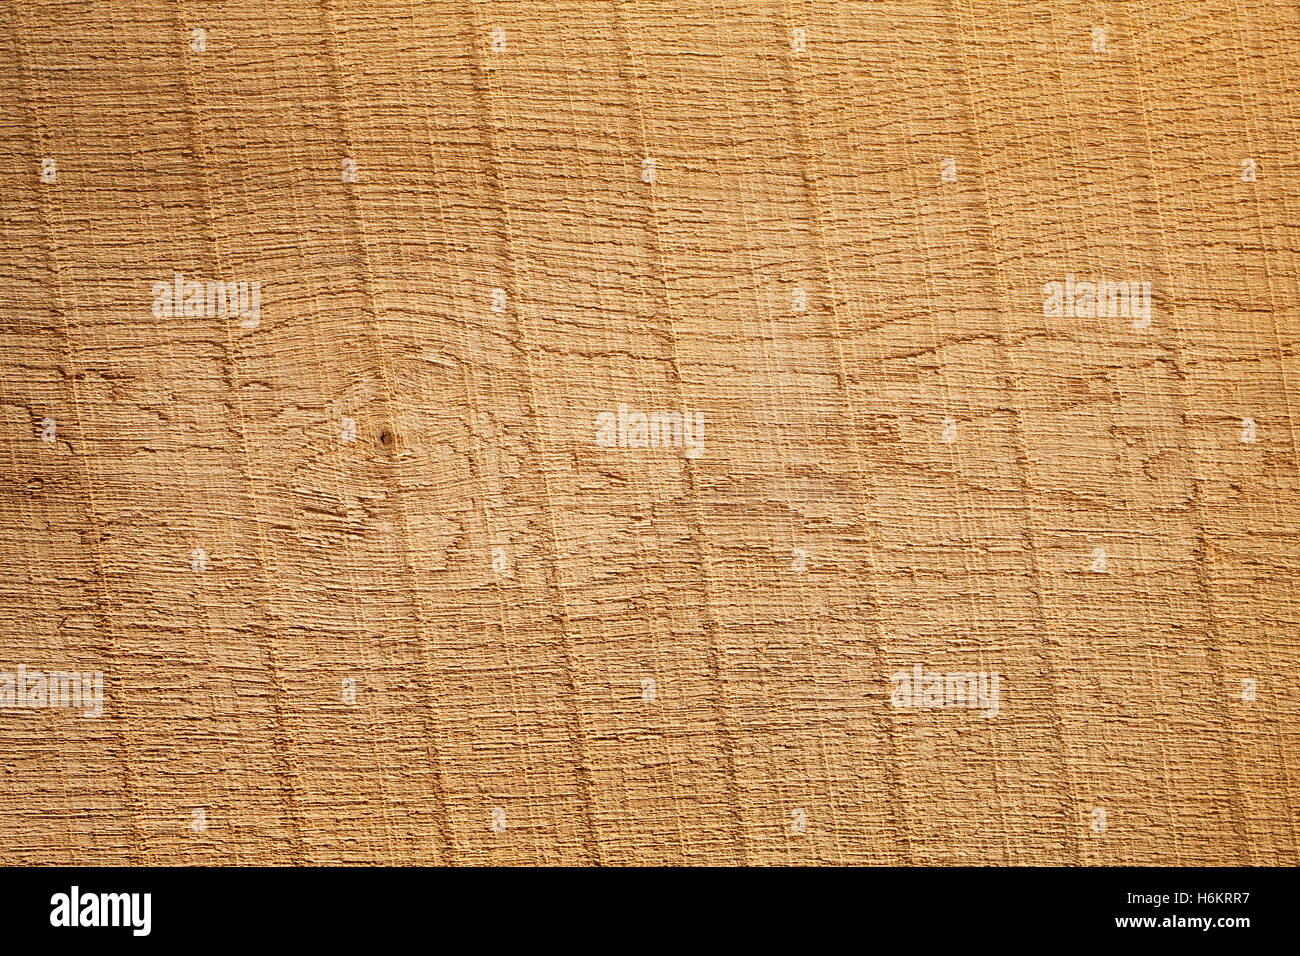 Textured surface of oak boards. Stock Photo